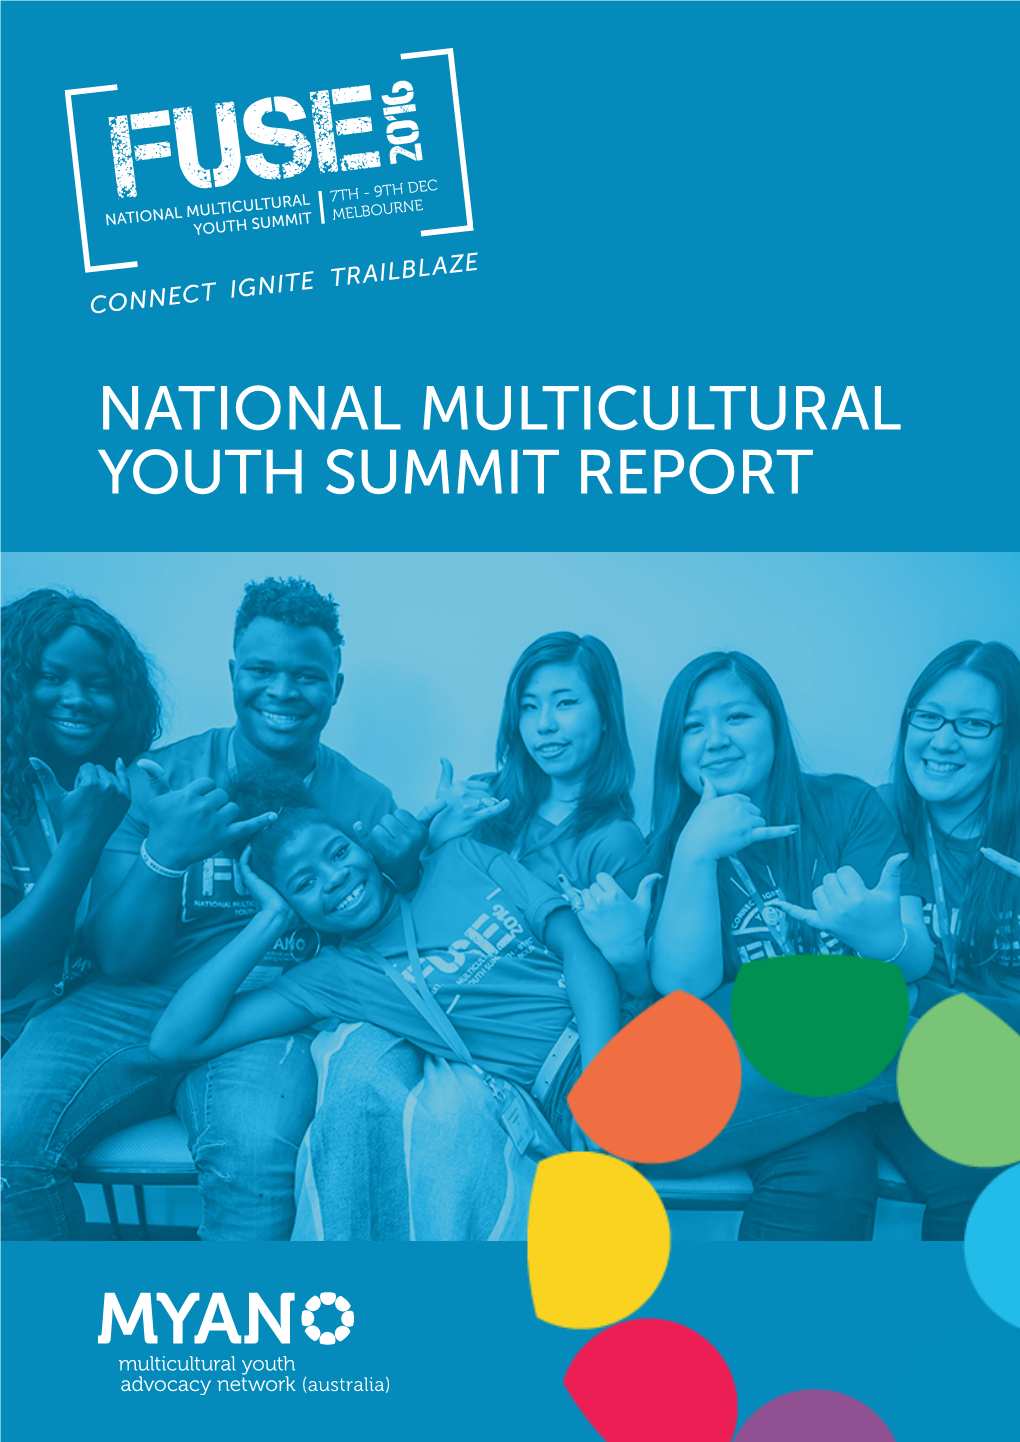 NATIONAL MULTICULTURAL YOUTH SUMMIT REPORT Contents